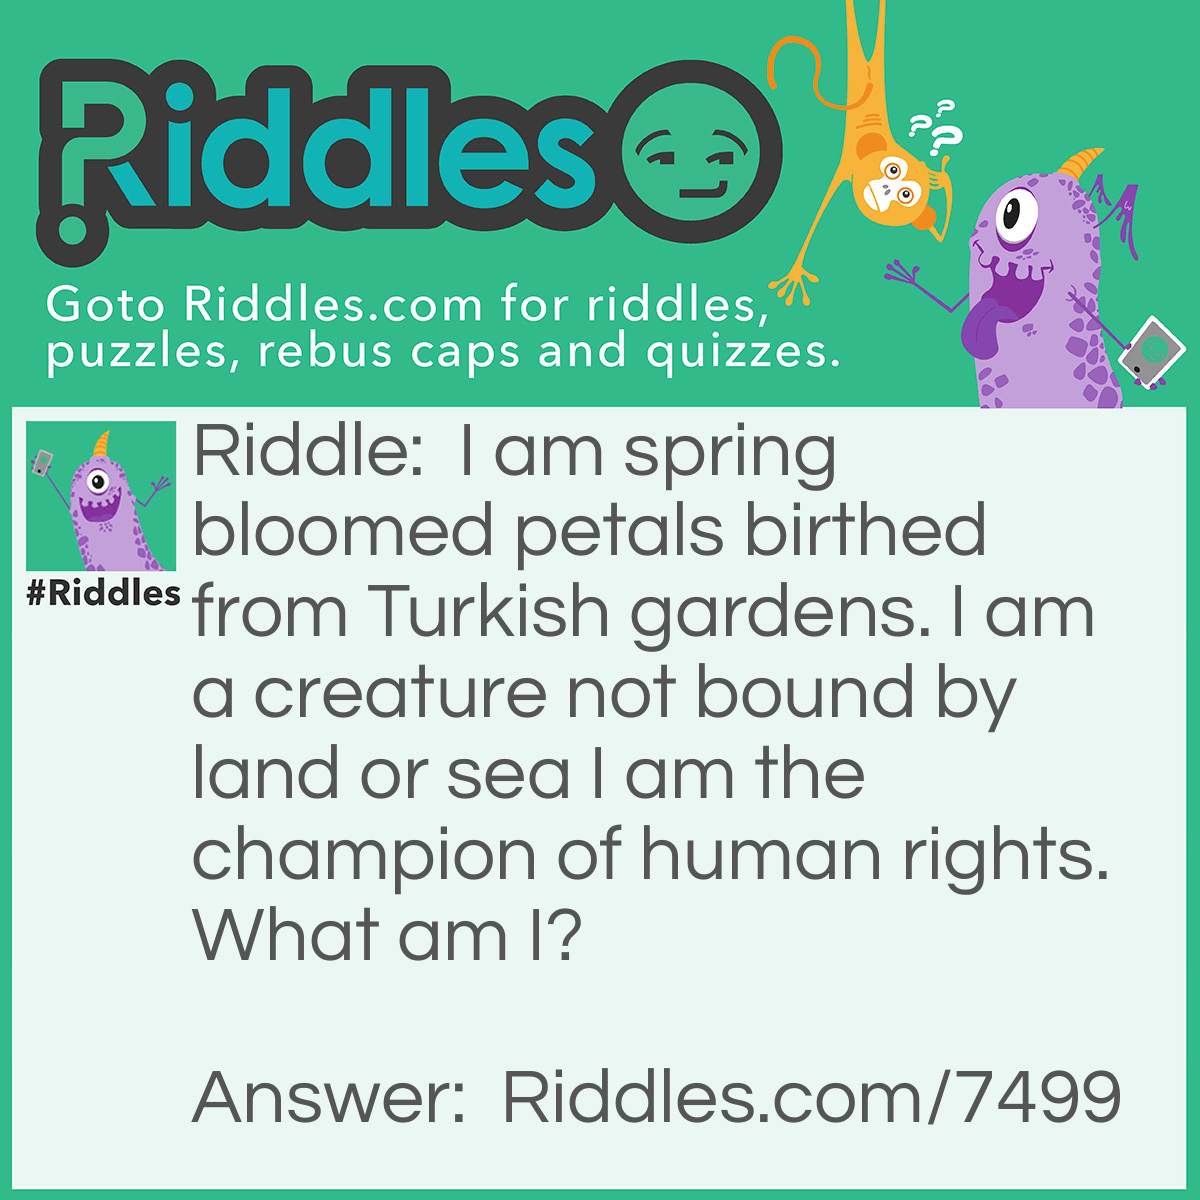 Riddle: I am spring bloomed petals birthed from Turkish gardens. I am a creature not bound by land or sea I am the champion of human rights. What am I? Answer: I don’t know please help